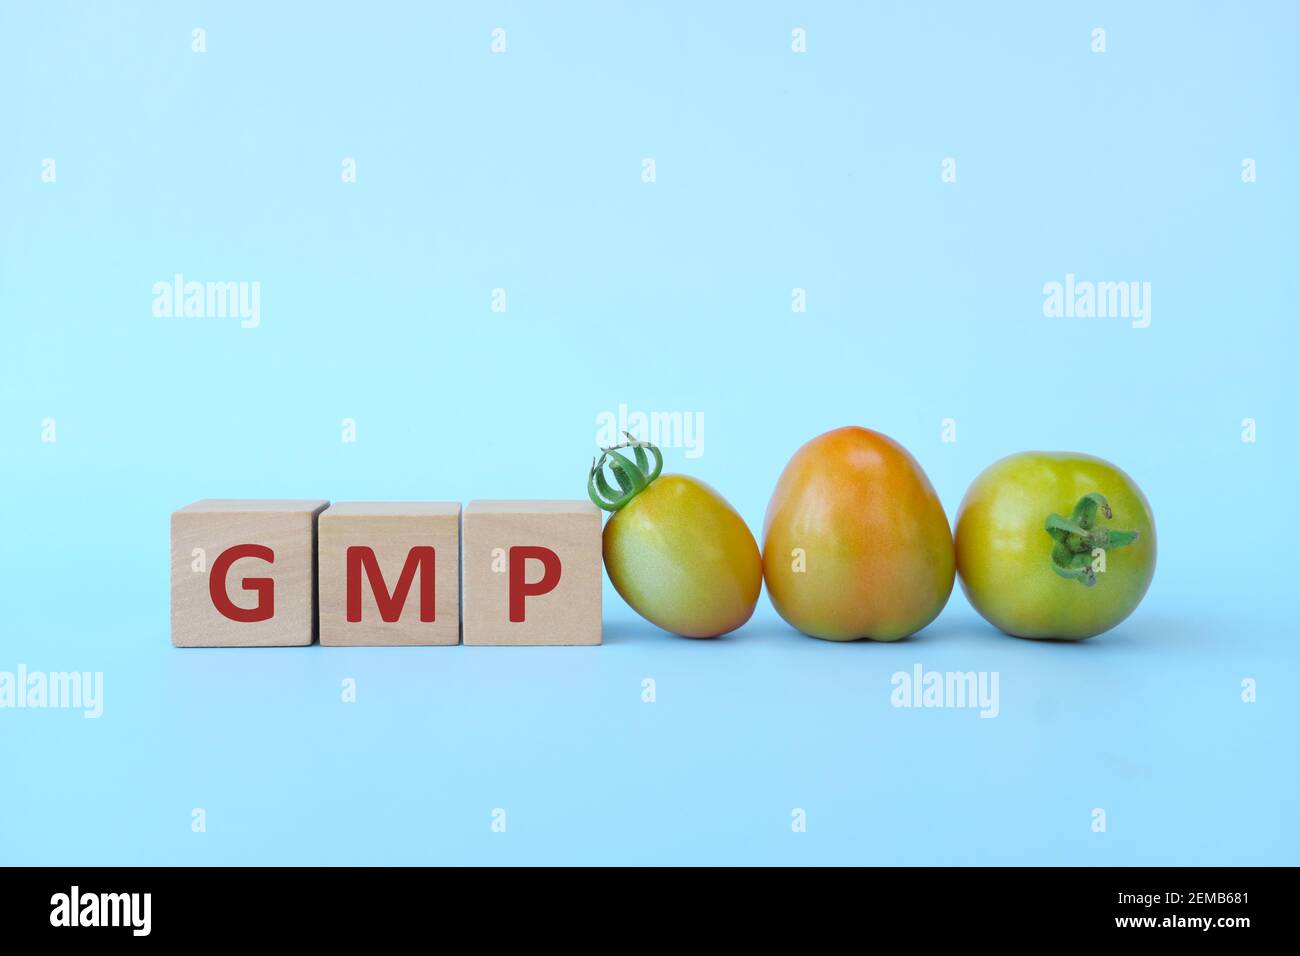 GMP word text on wooden blocks in blue background with copy space and tomato fruit. Good manufacturing practice in food industry. Stock Photo